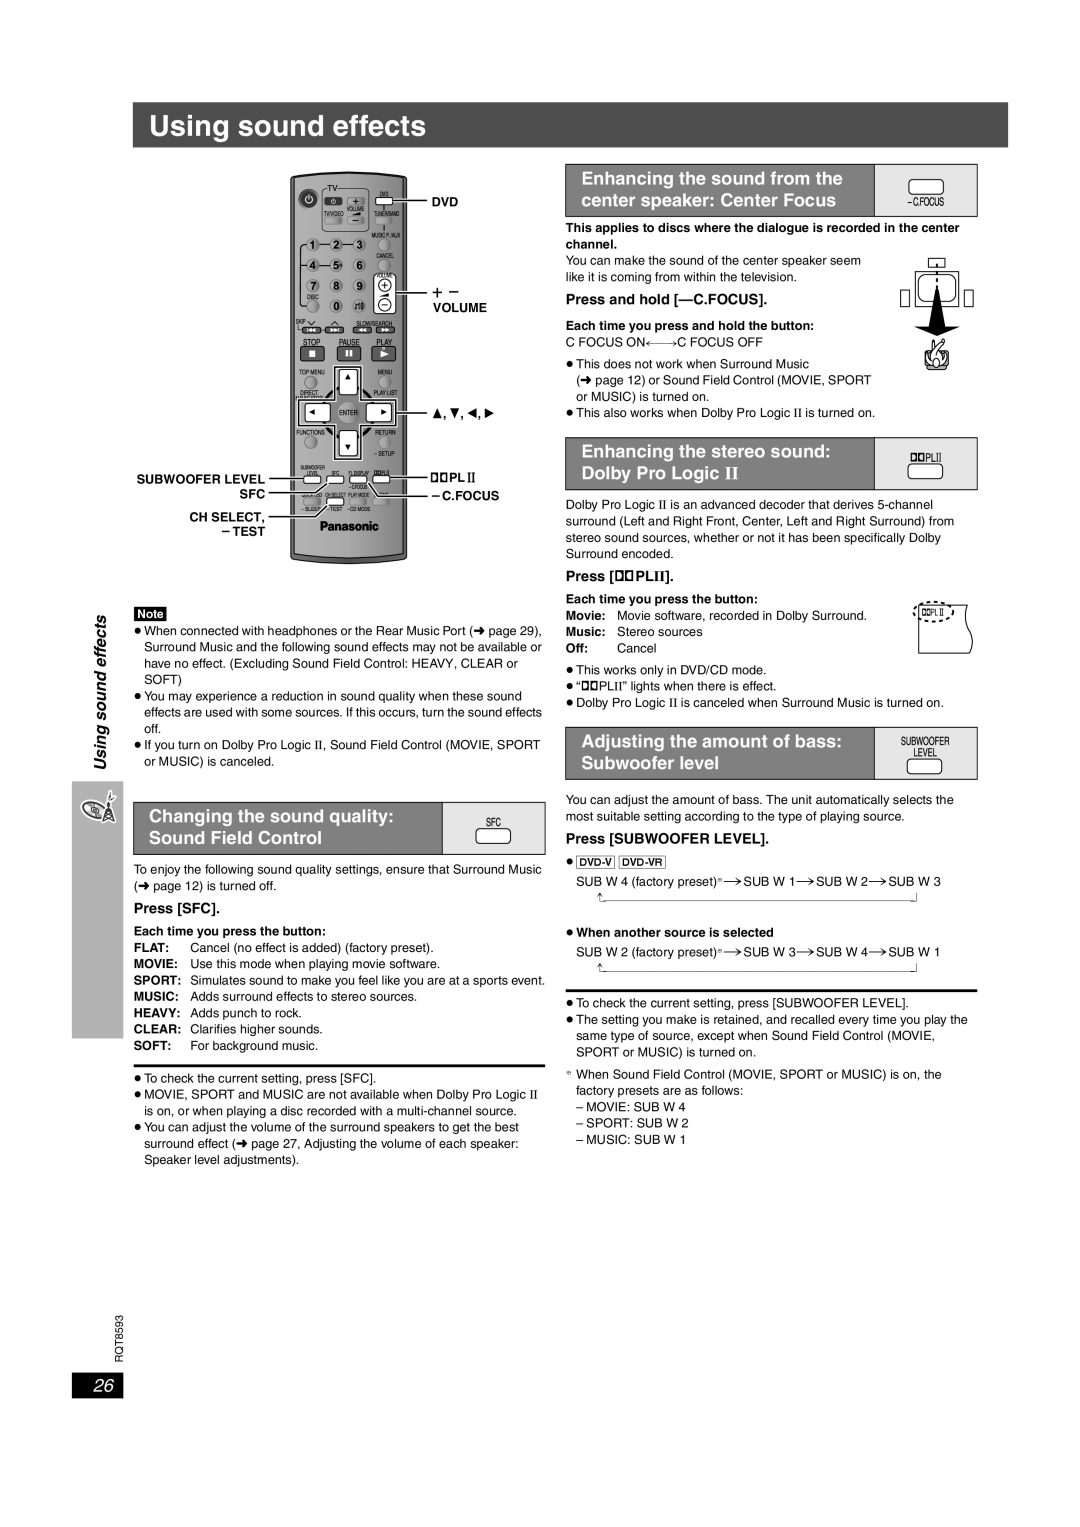 Panasonic SC-HT440 Using sound effects, Changing the sound quality Sound Field Control, Press SFC, Press and hold -C.FOCUS 